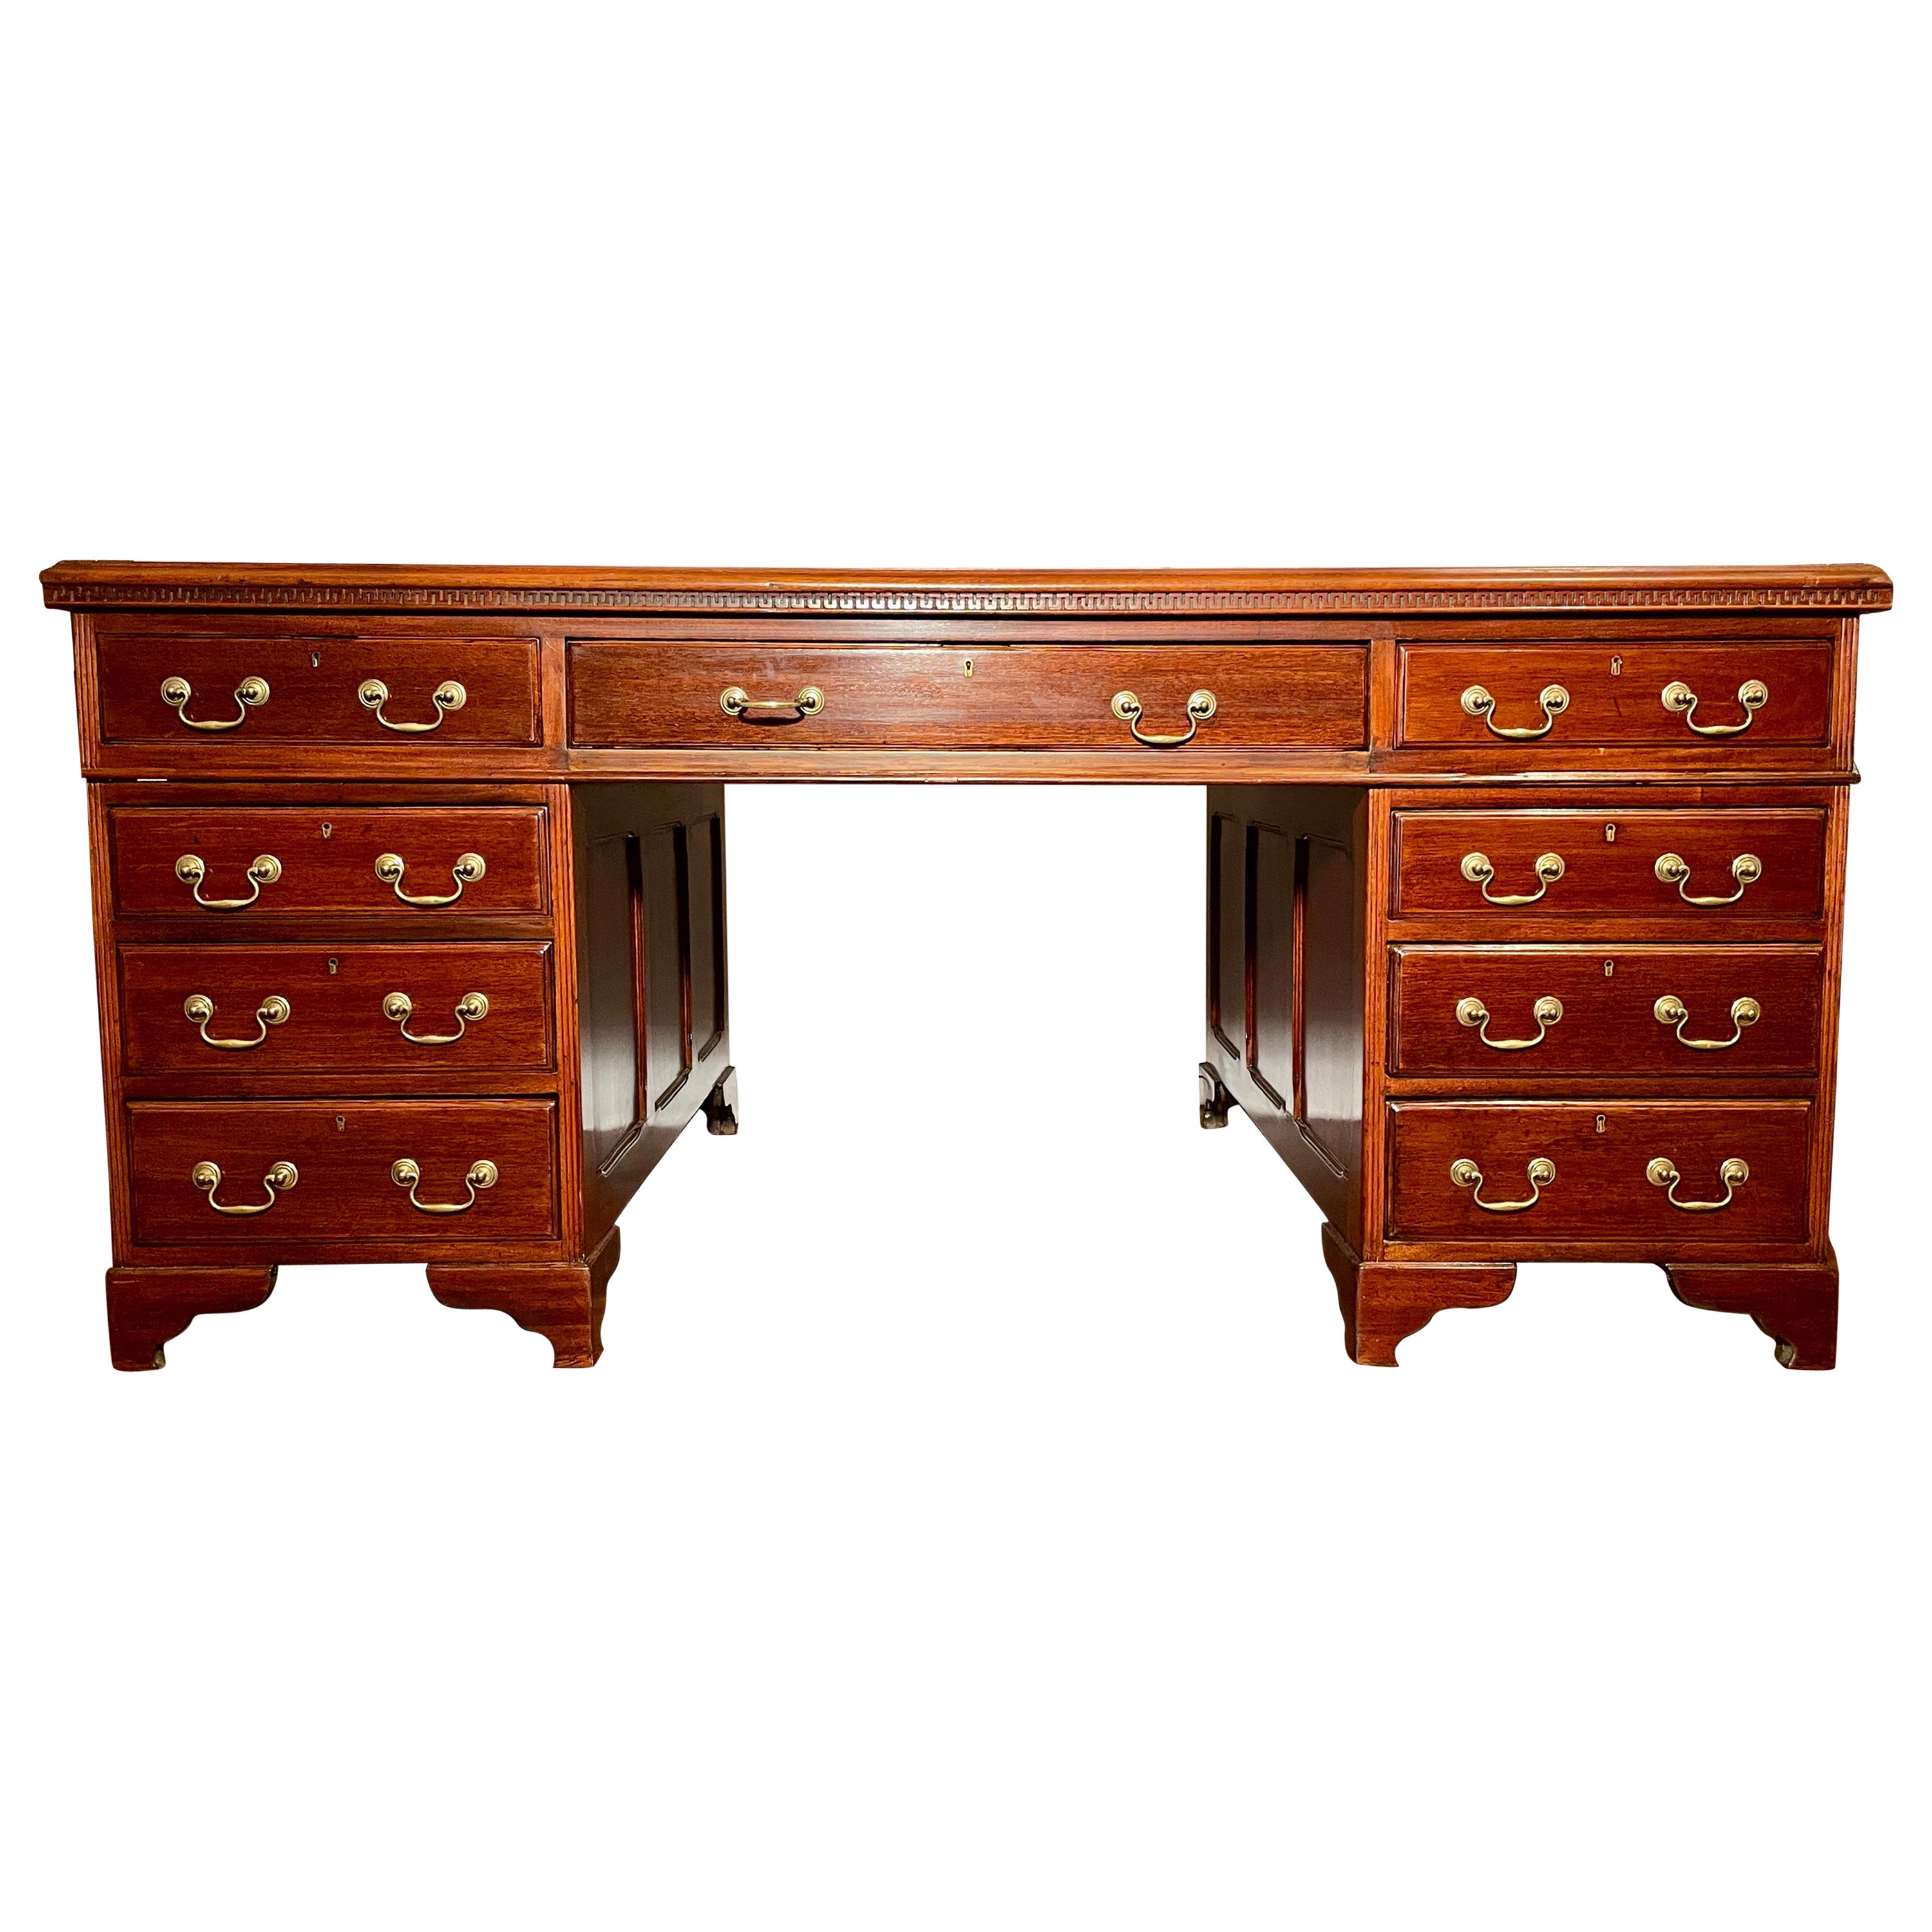 Antique English Mahogany Partner's Desk with Leather Top, Circa 1880.